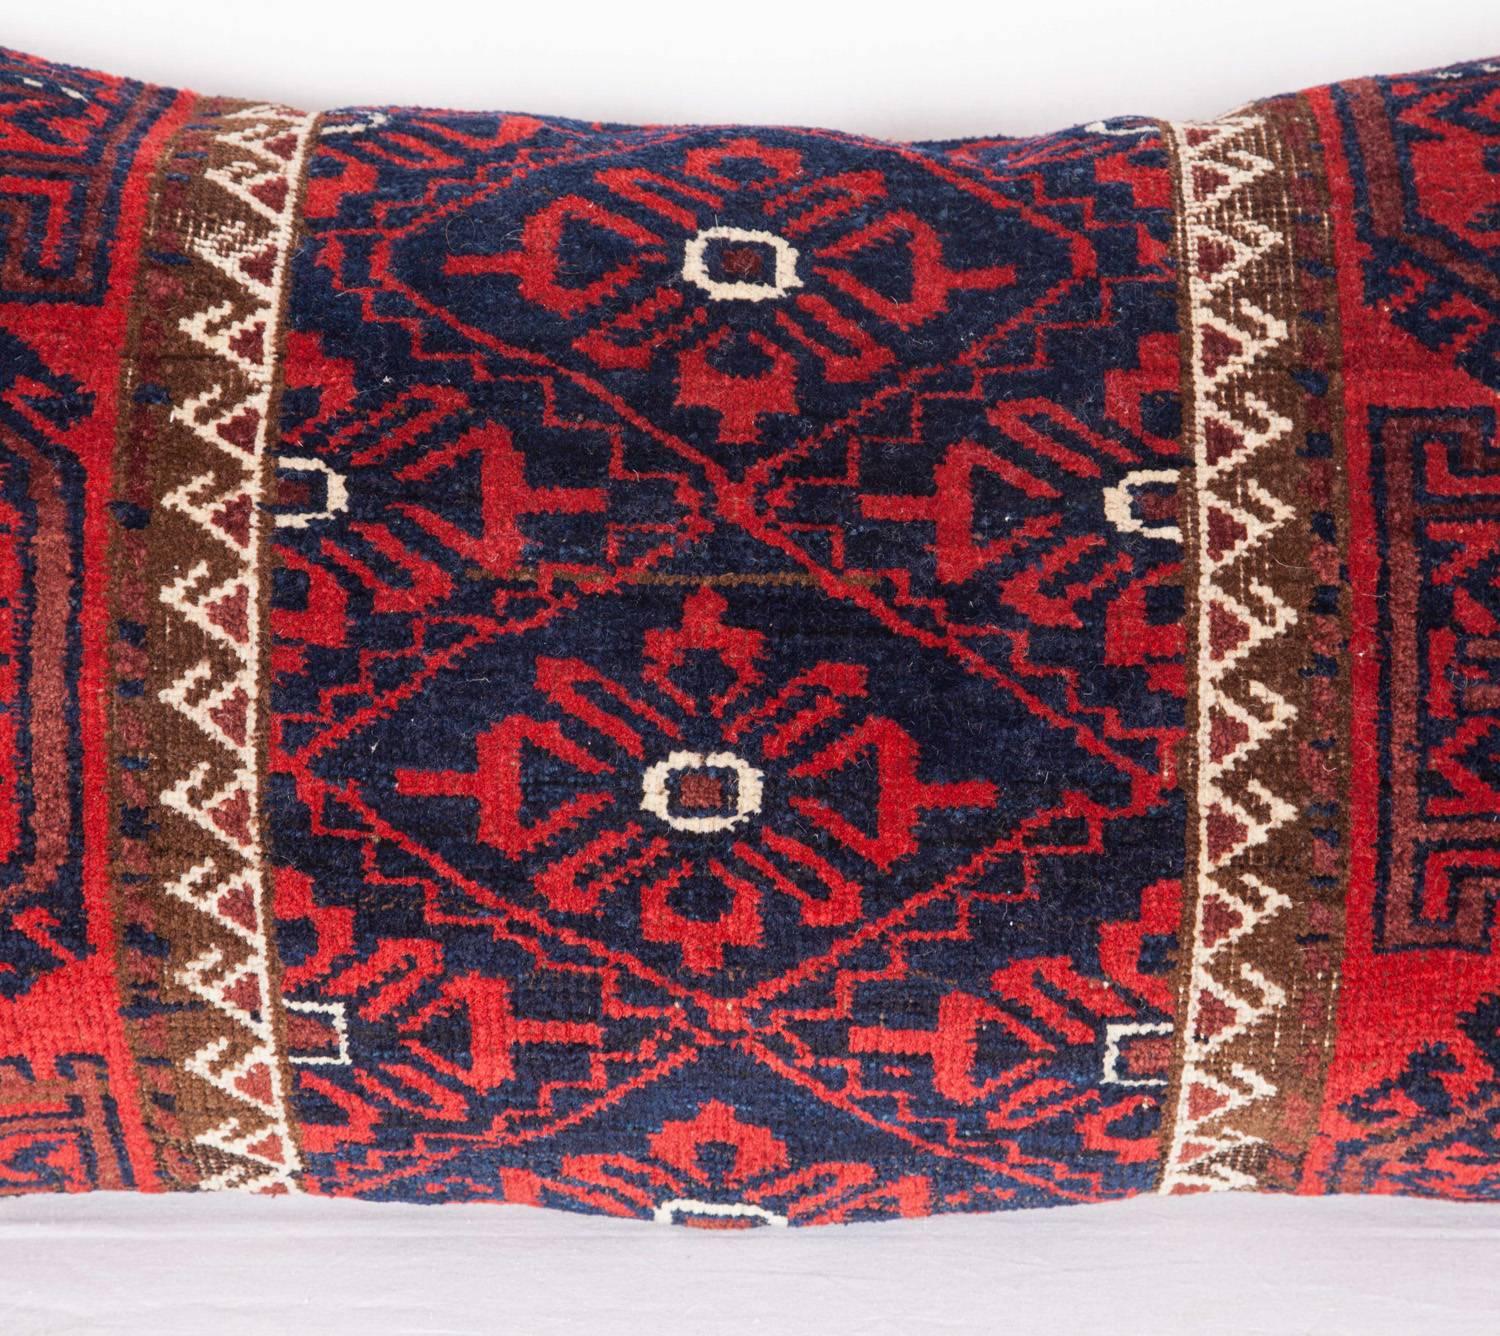 The pillow is made out of a late 19th century, Baluch rug fragment. It does not come with an insert but it comes with a bag made to the size and out of cotton to accommodate the filling. The backing is made of linen. Please note filling is not